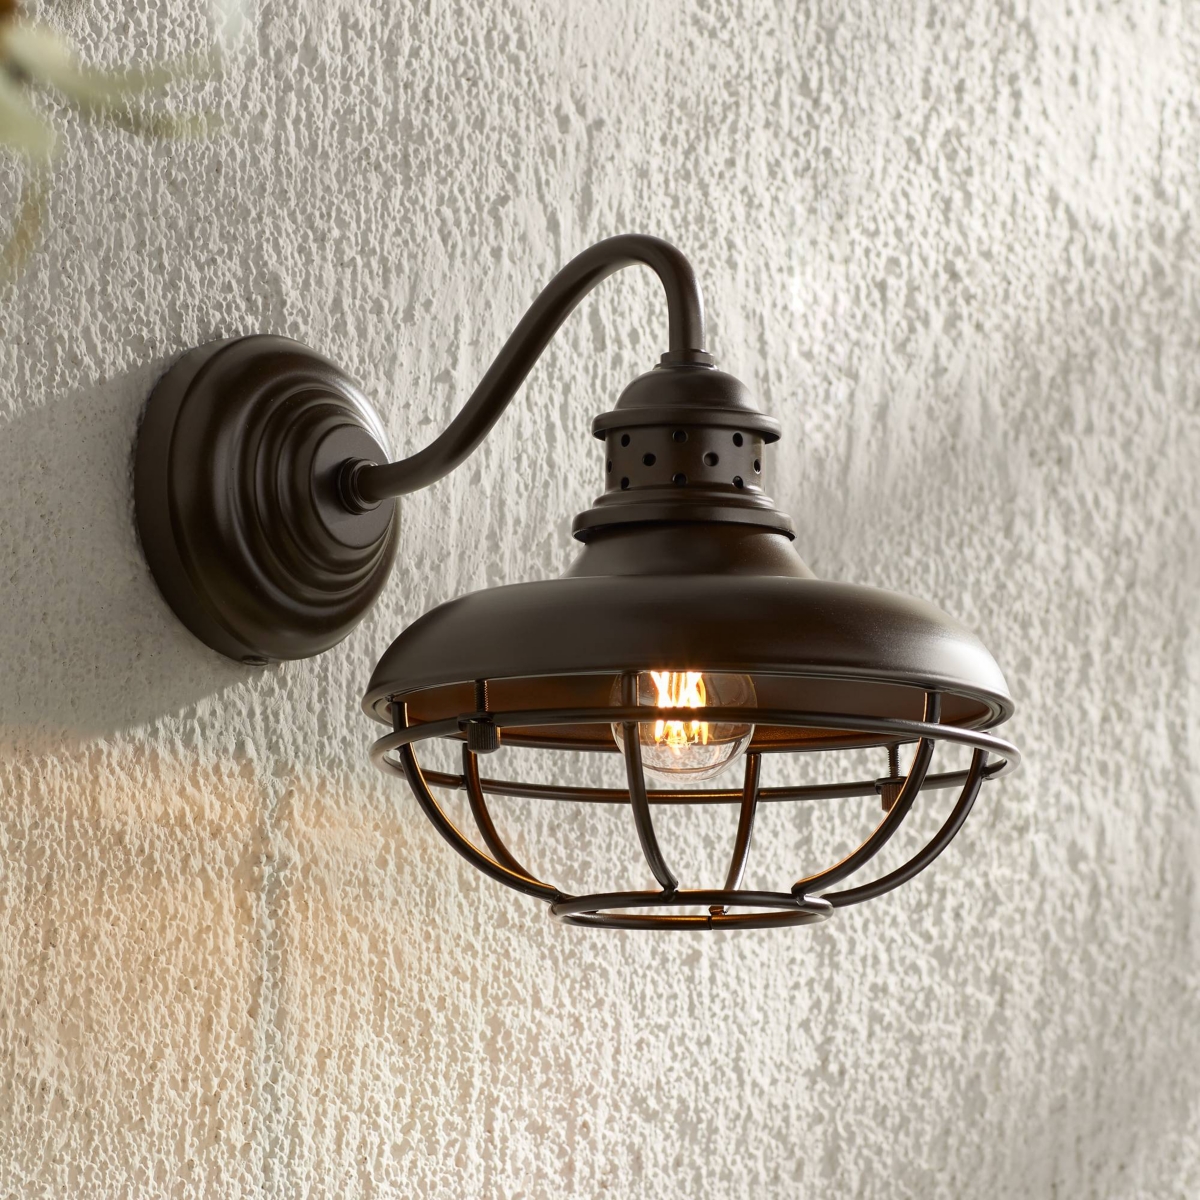 Franklin Park Rustic Industrial Outdoor Wall Light Fixture Oil Rubbed Bronze 9" Caged Decor for Exterior House Barn Porch Patio Outside Deck Garage Ya